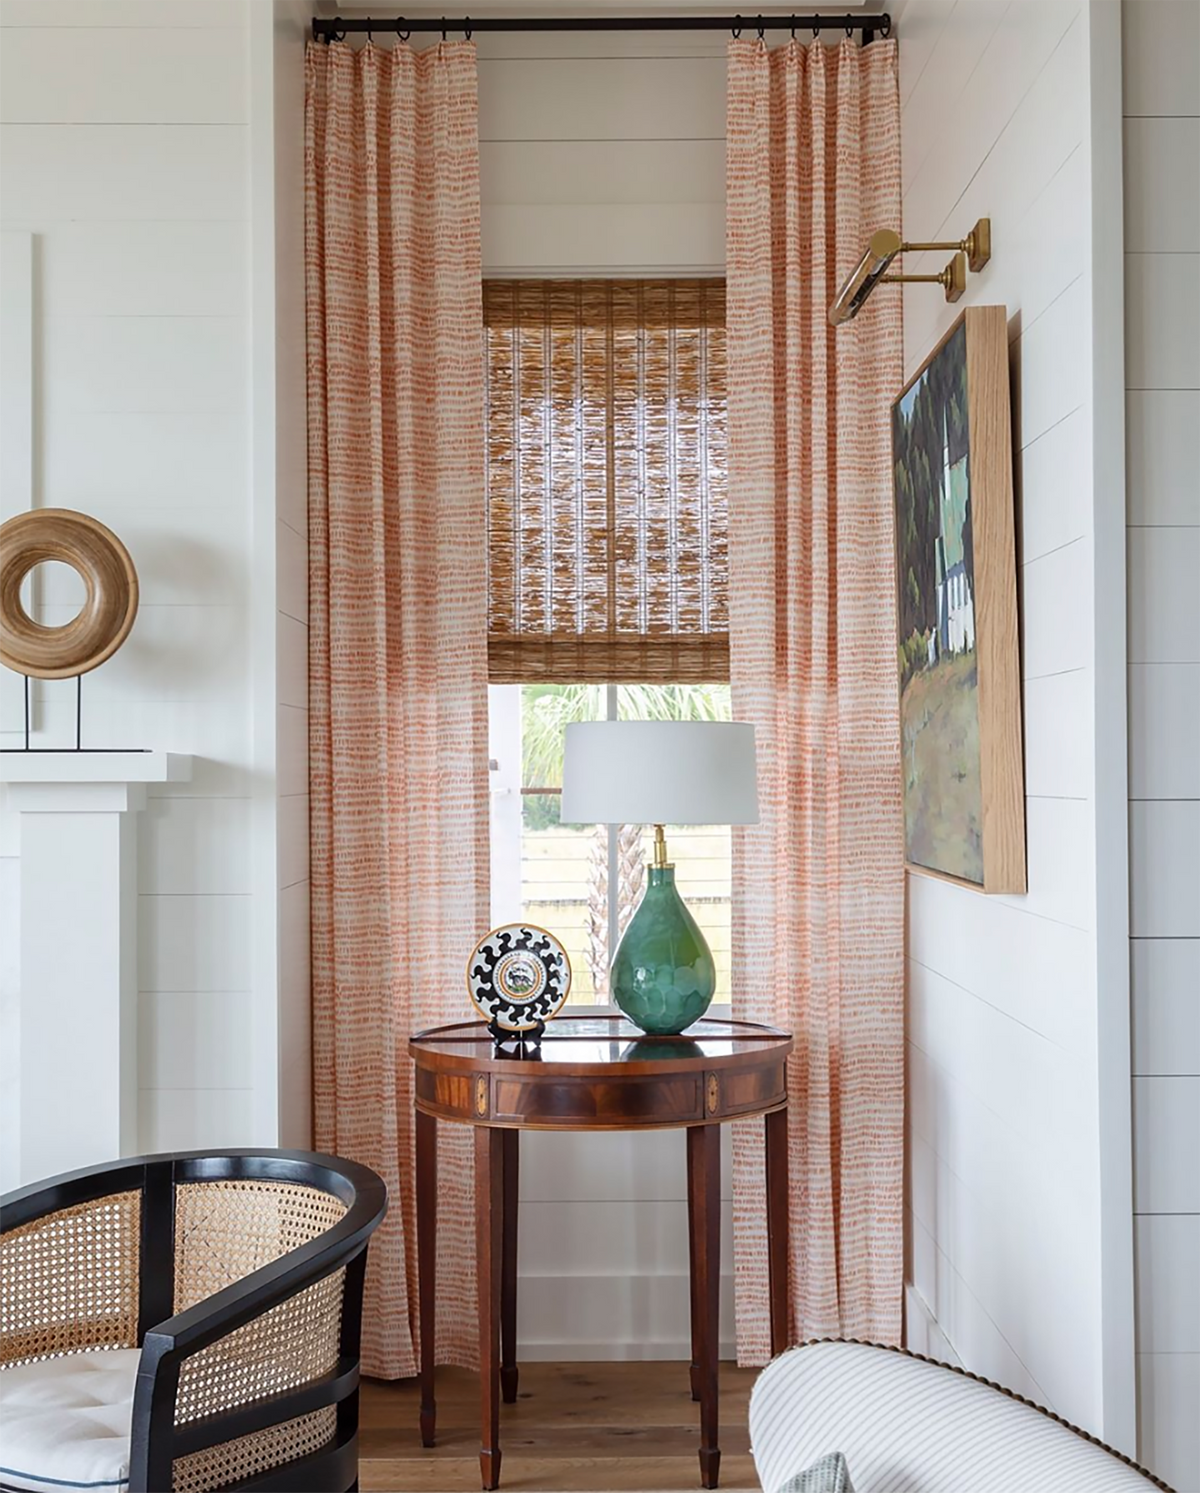 A corner of a living room with a window. There are curtains in Dashes in Tangerine, a small scale print. There is a table with a lamp in front of the window. A chair is partially in the frame. Allison Elebash is the interior designer.